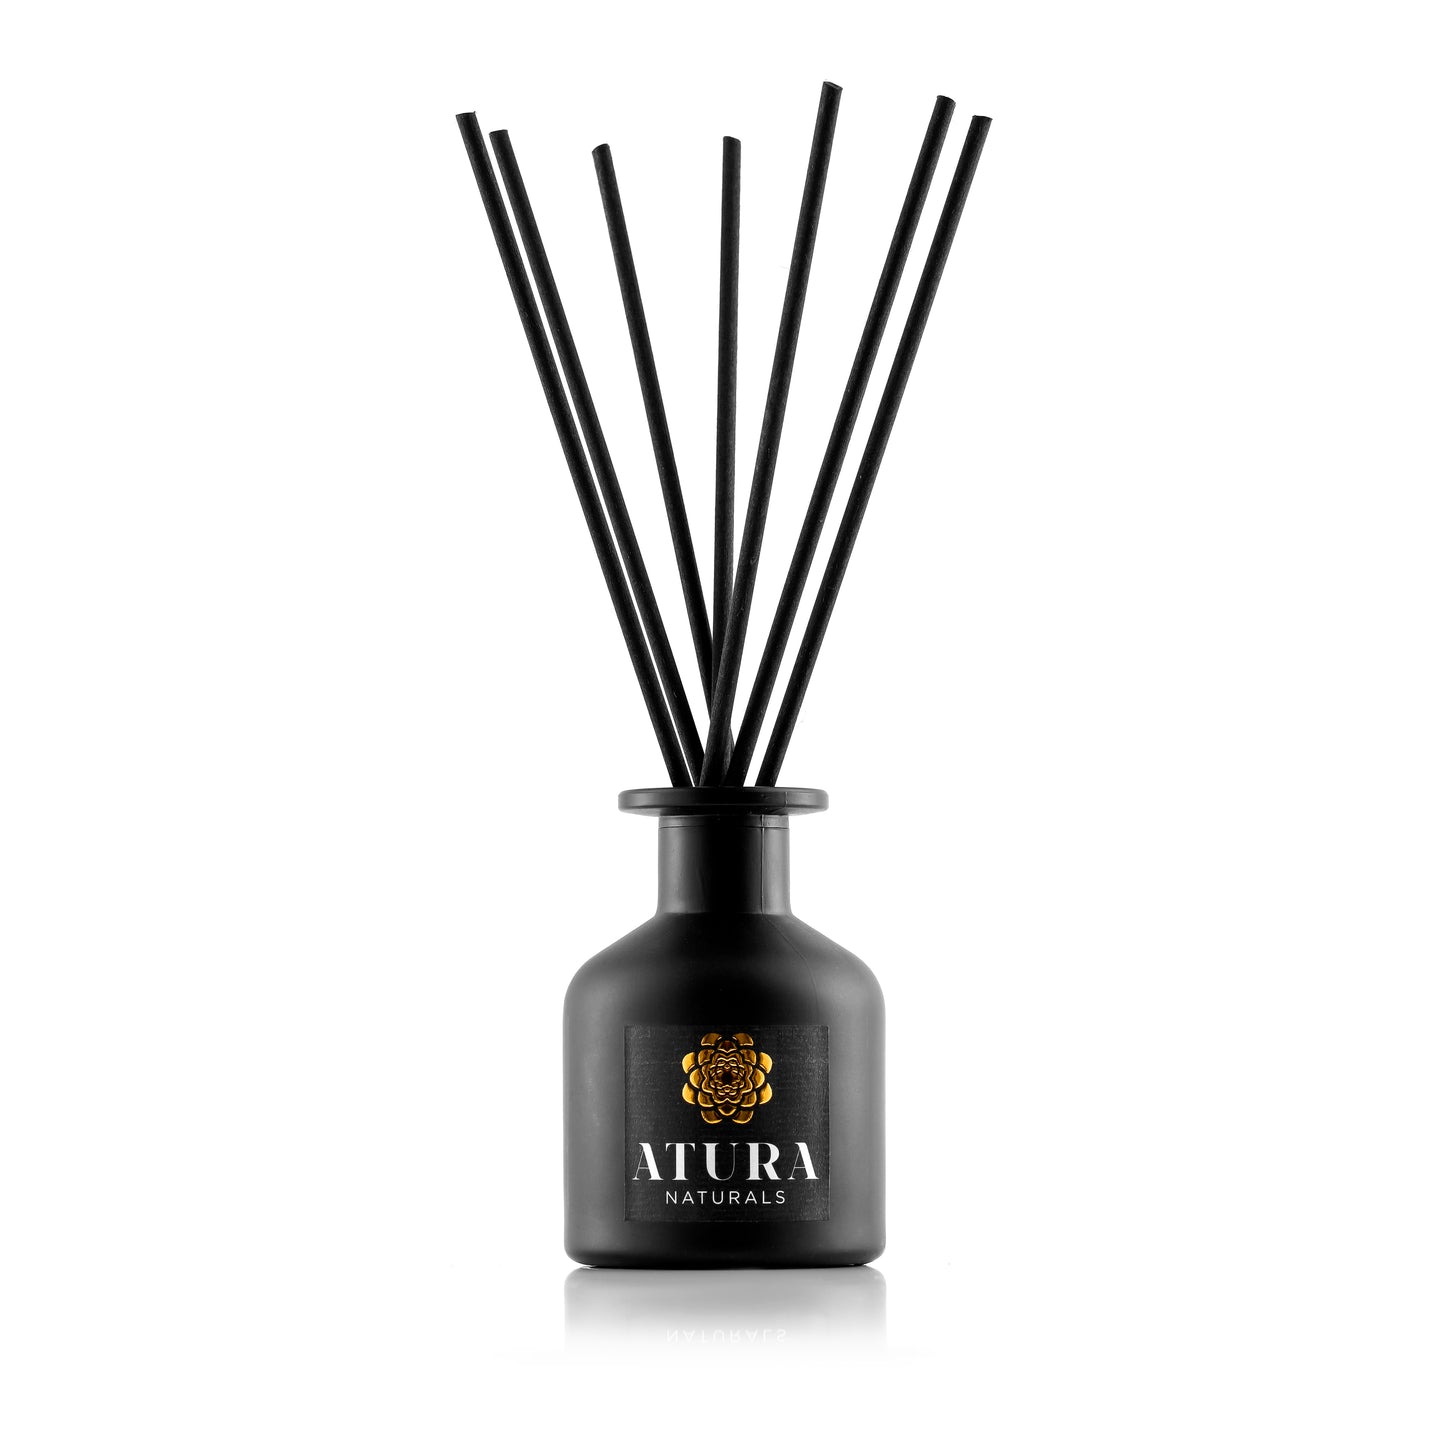 Scented Reed Diffusers